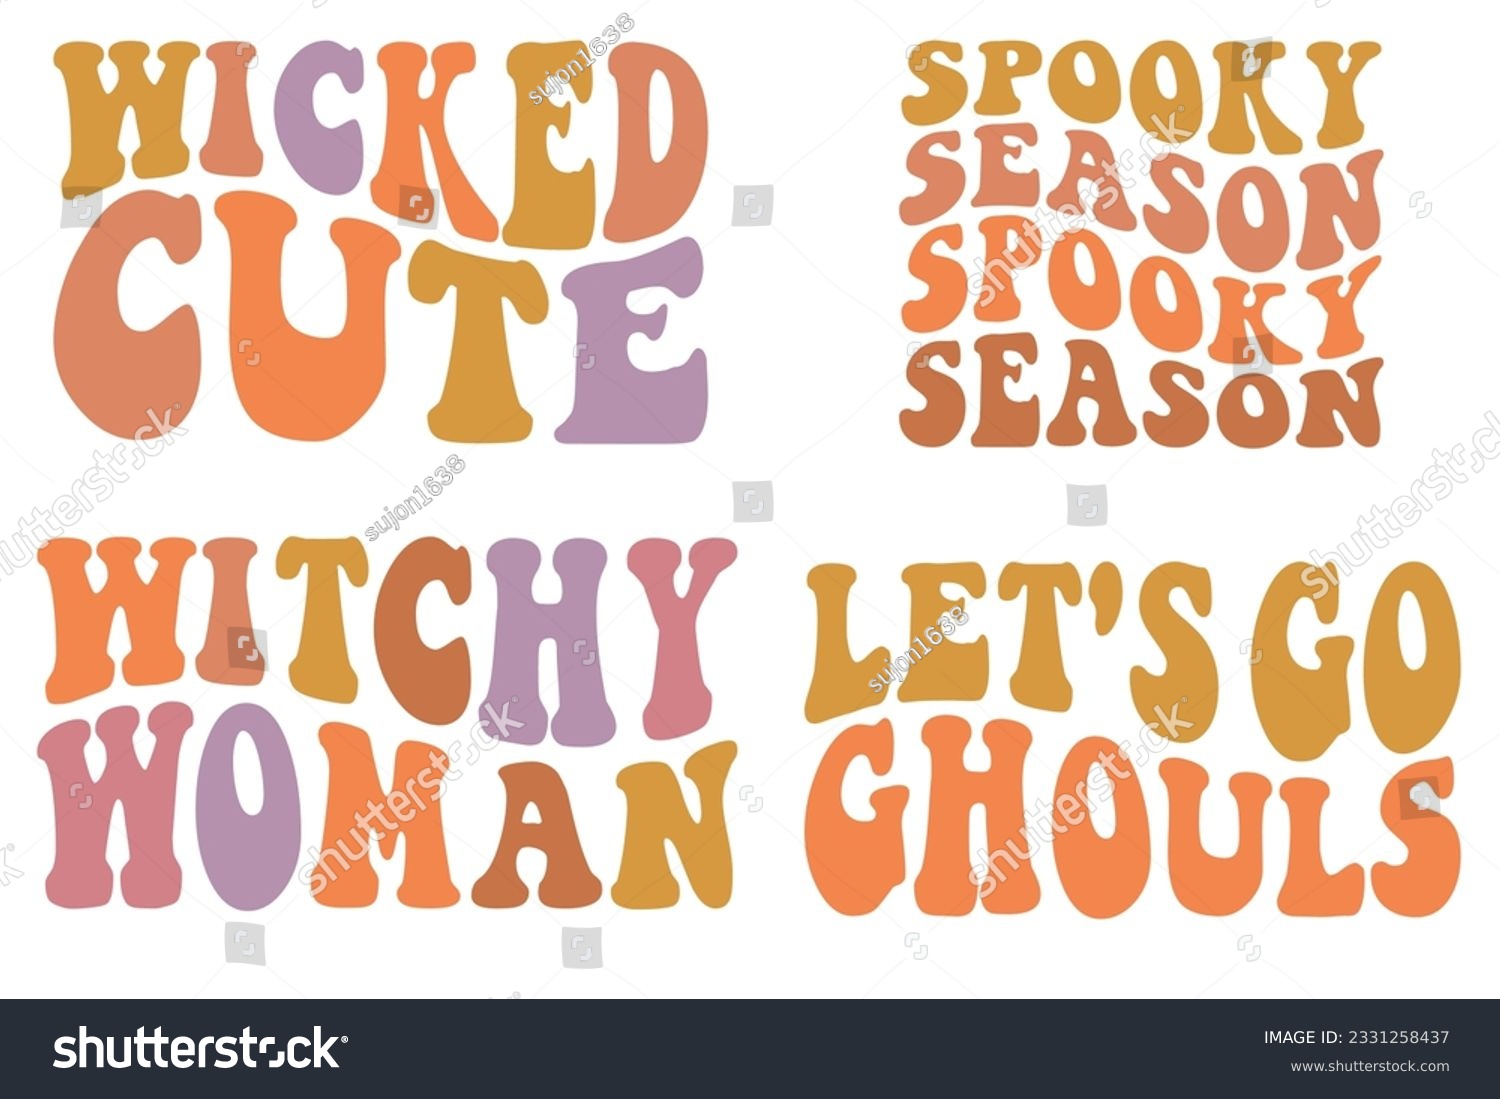 SVG of Wicked Cute, Spooky Season, Witch Woman, Let's Go Ghouls Halloween Retro wavy SVG bundle T-shirt designs svg